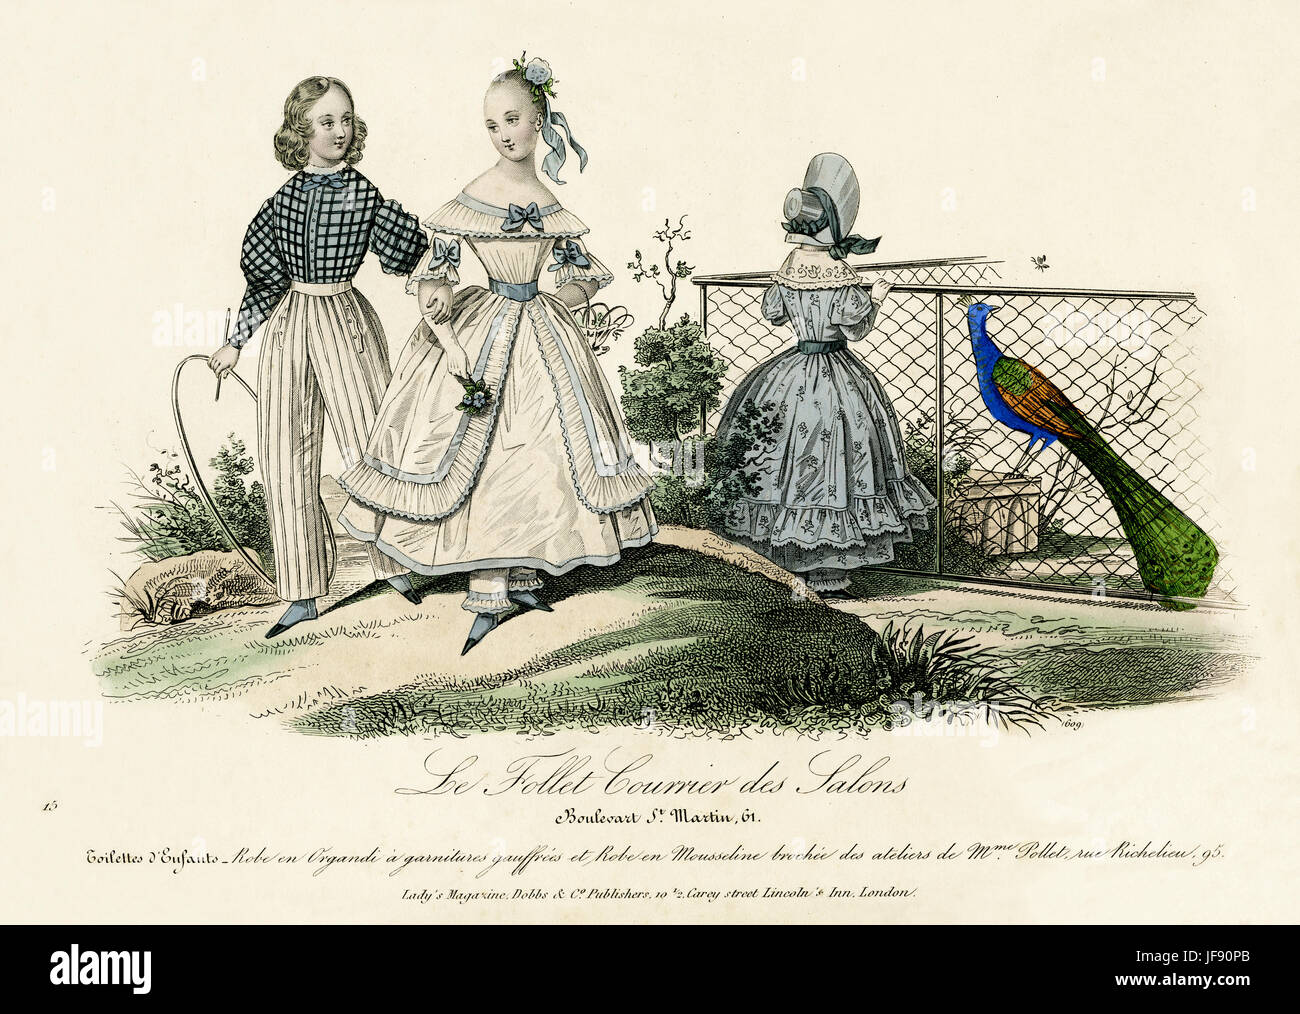 Parisian fashion for children, 19th century. Two girls in full skirted dresses decorated with ribbons. One girl wears a wide brimmed bonnet tied with ribbon, looking over the fence at a peacock. Boy wears striped, loose trowsers and checked shirt, with wide sleeves and a bow tie. Le Follet, Courrier des Salons Stock Photo